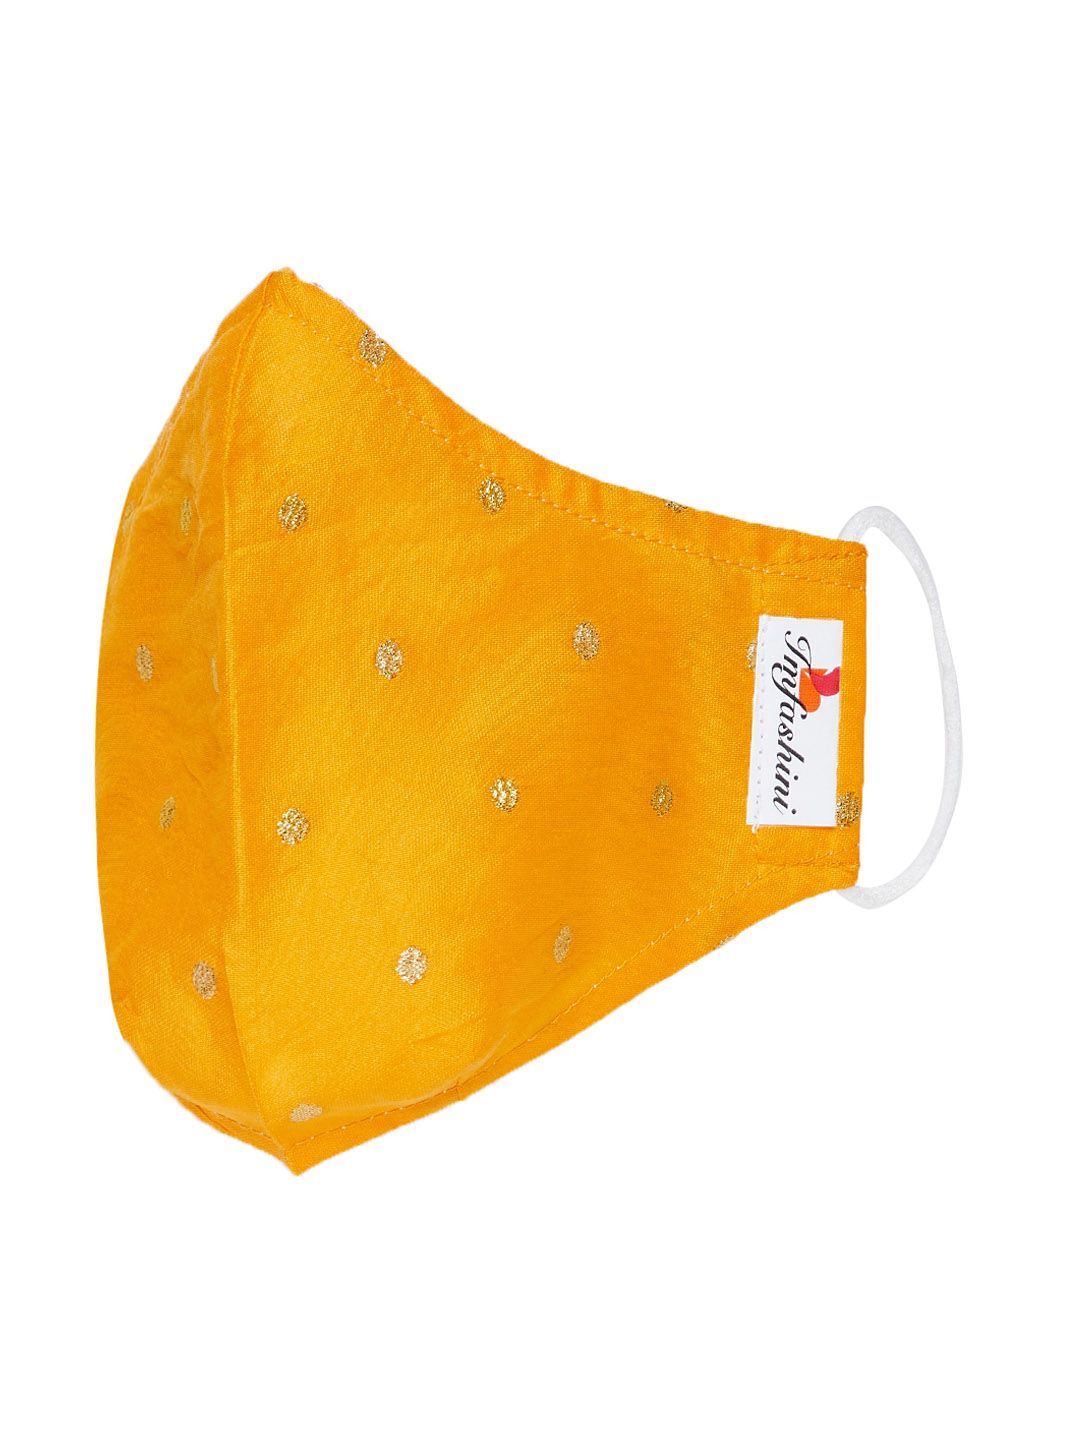 Imfashini Women Yellow & Silver-Toned Embroidered 2-Ply Reusable Cloth Masks Price in India